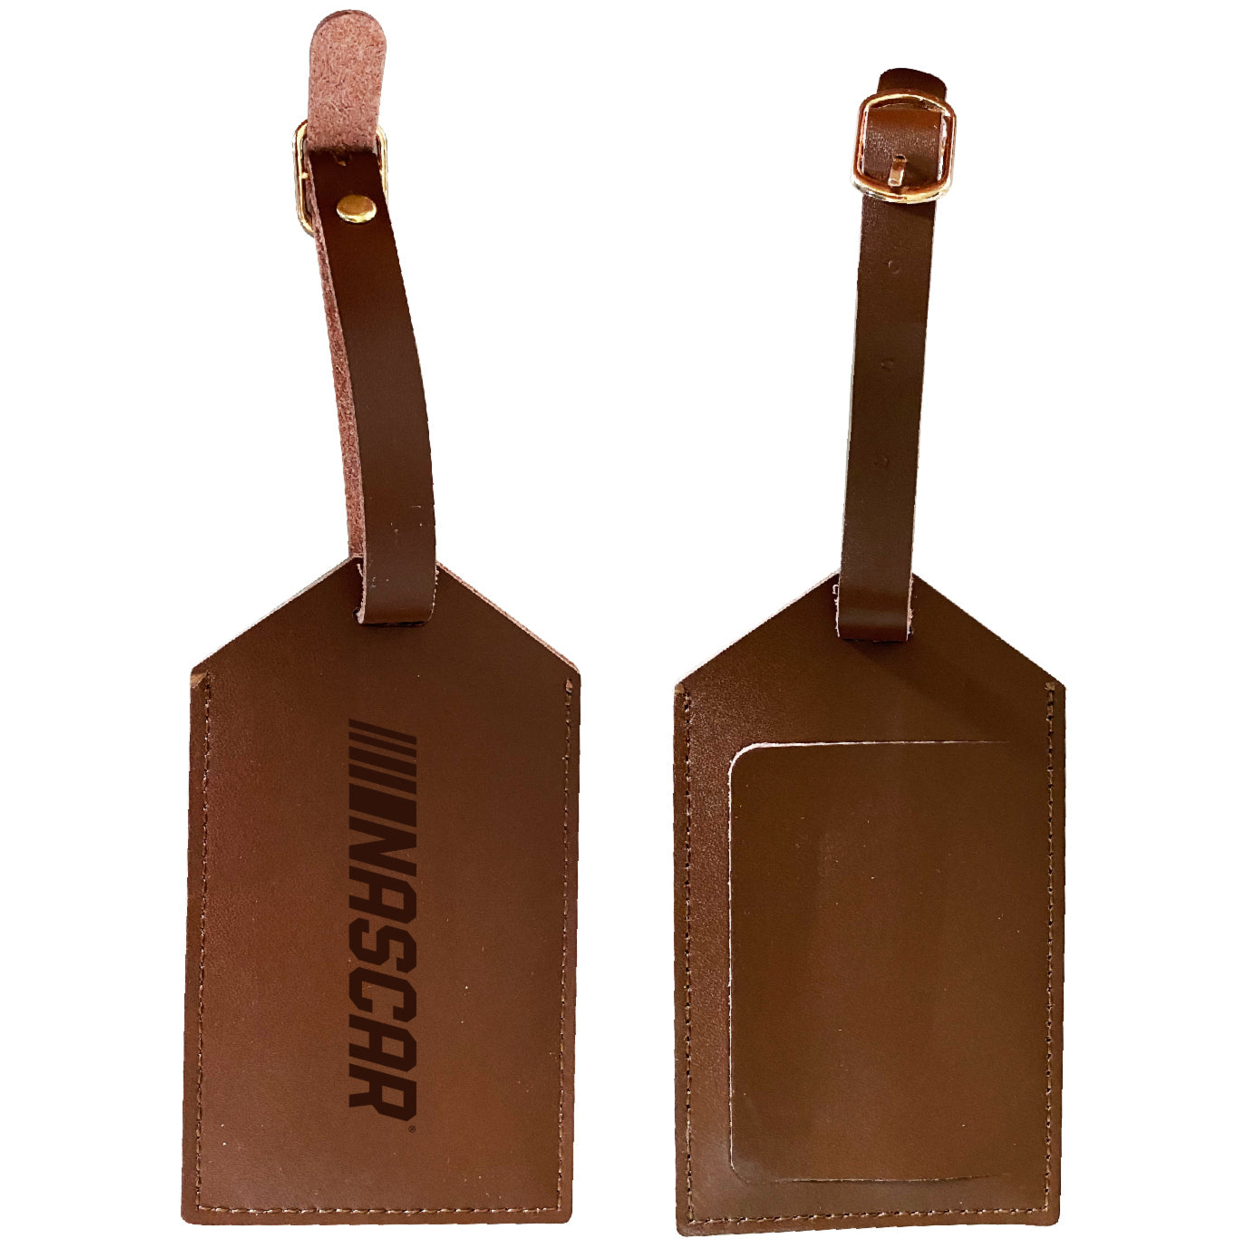 Nascar Leather Luggage Tag Engraved